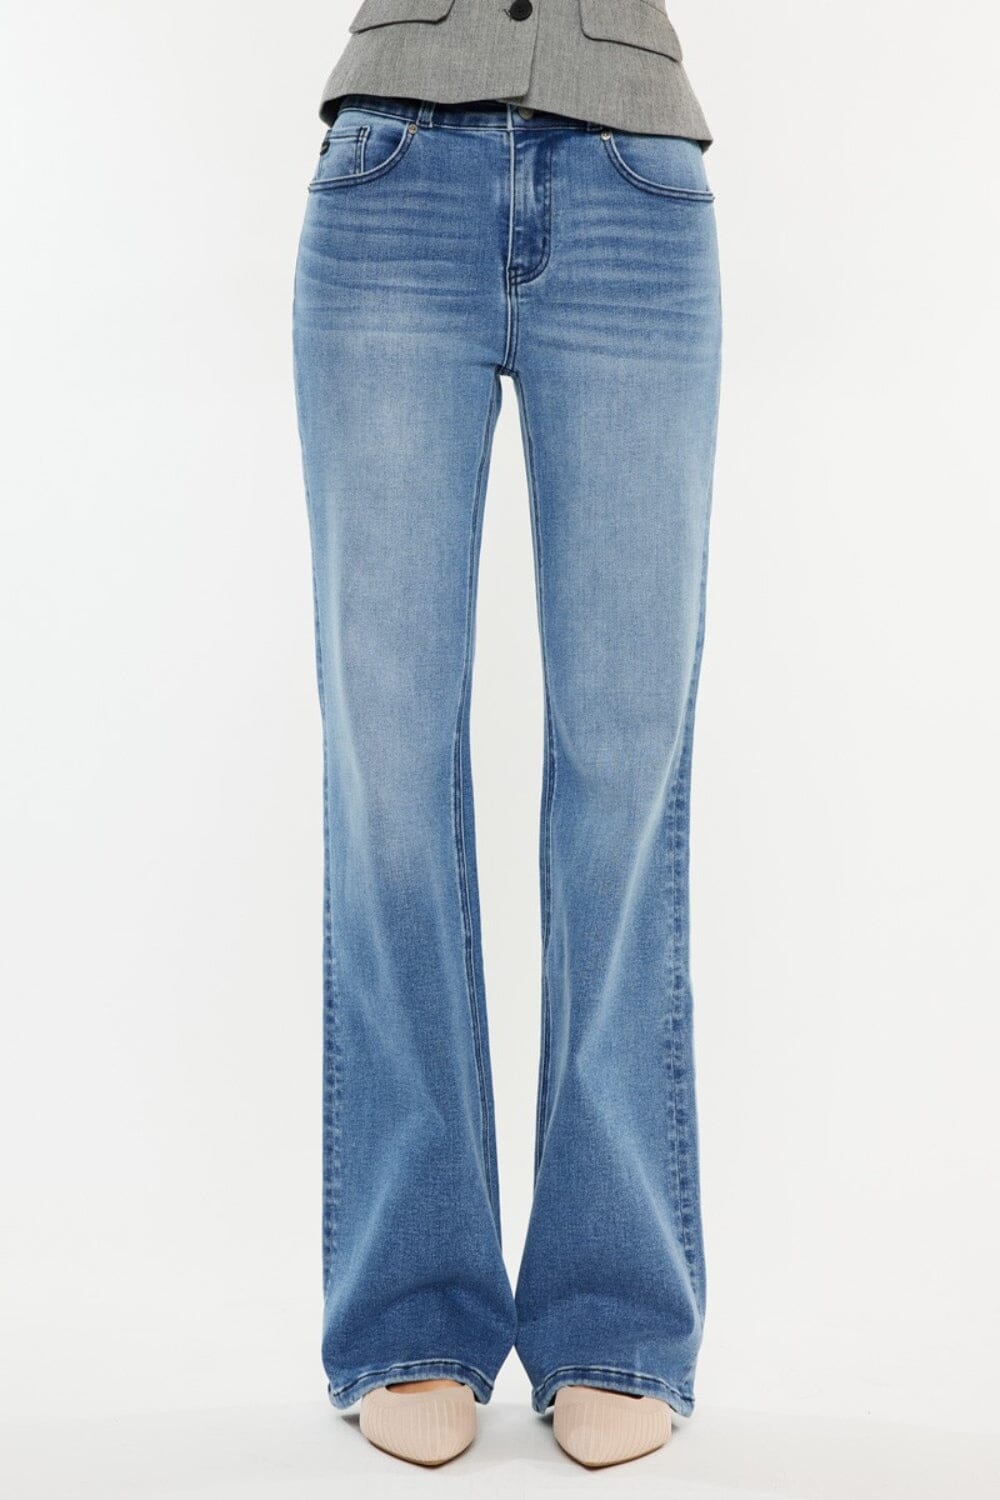 Kancan Medium Blue Ultra High Rise Cat's Whiskers Jeans jeans jehouze 